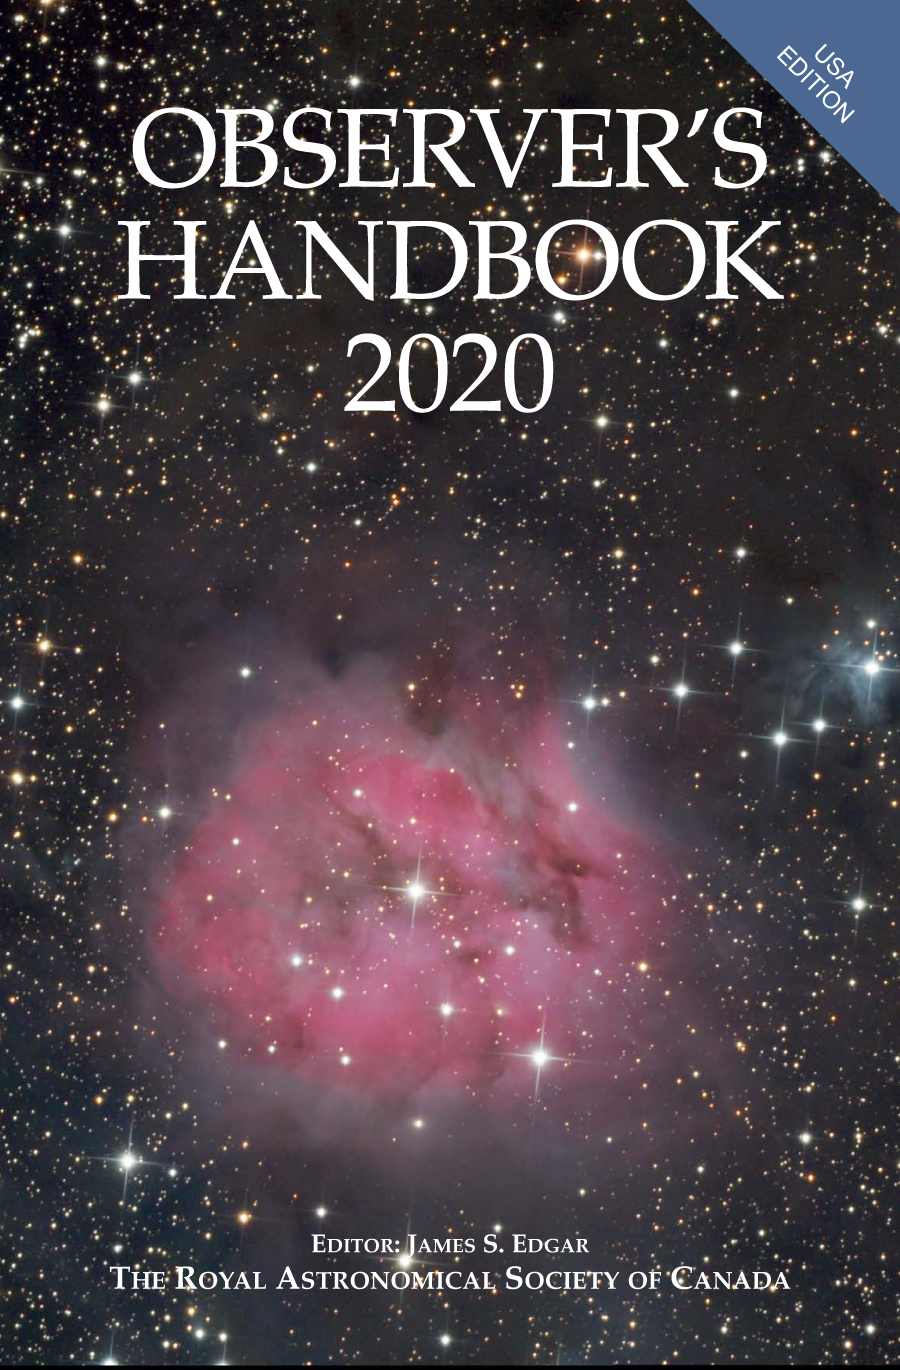 Observer's Handbook 2020, by The Royal Astronomical Society of Canada. Edited by David M.F. Chapman